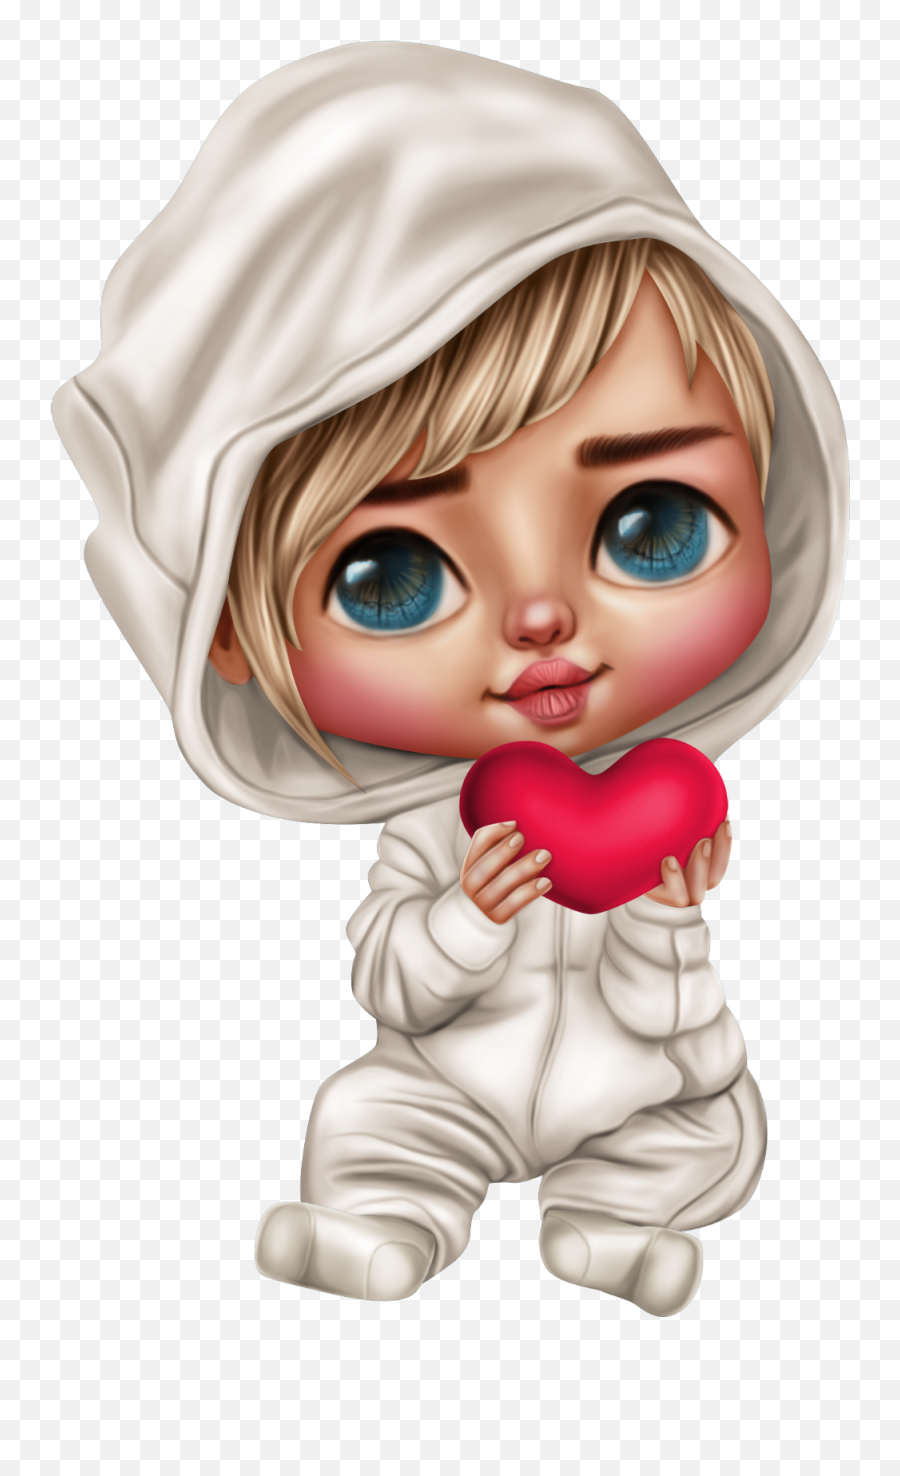 Imgbb - Cartoon Baby Drawing In Pjs Emoji,How To Draw A Chibi Skull Emoticon In Photoshop